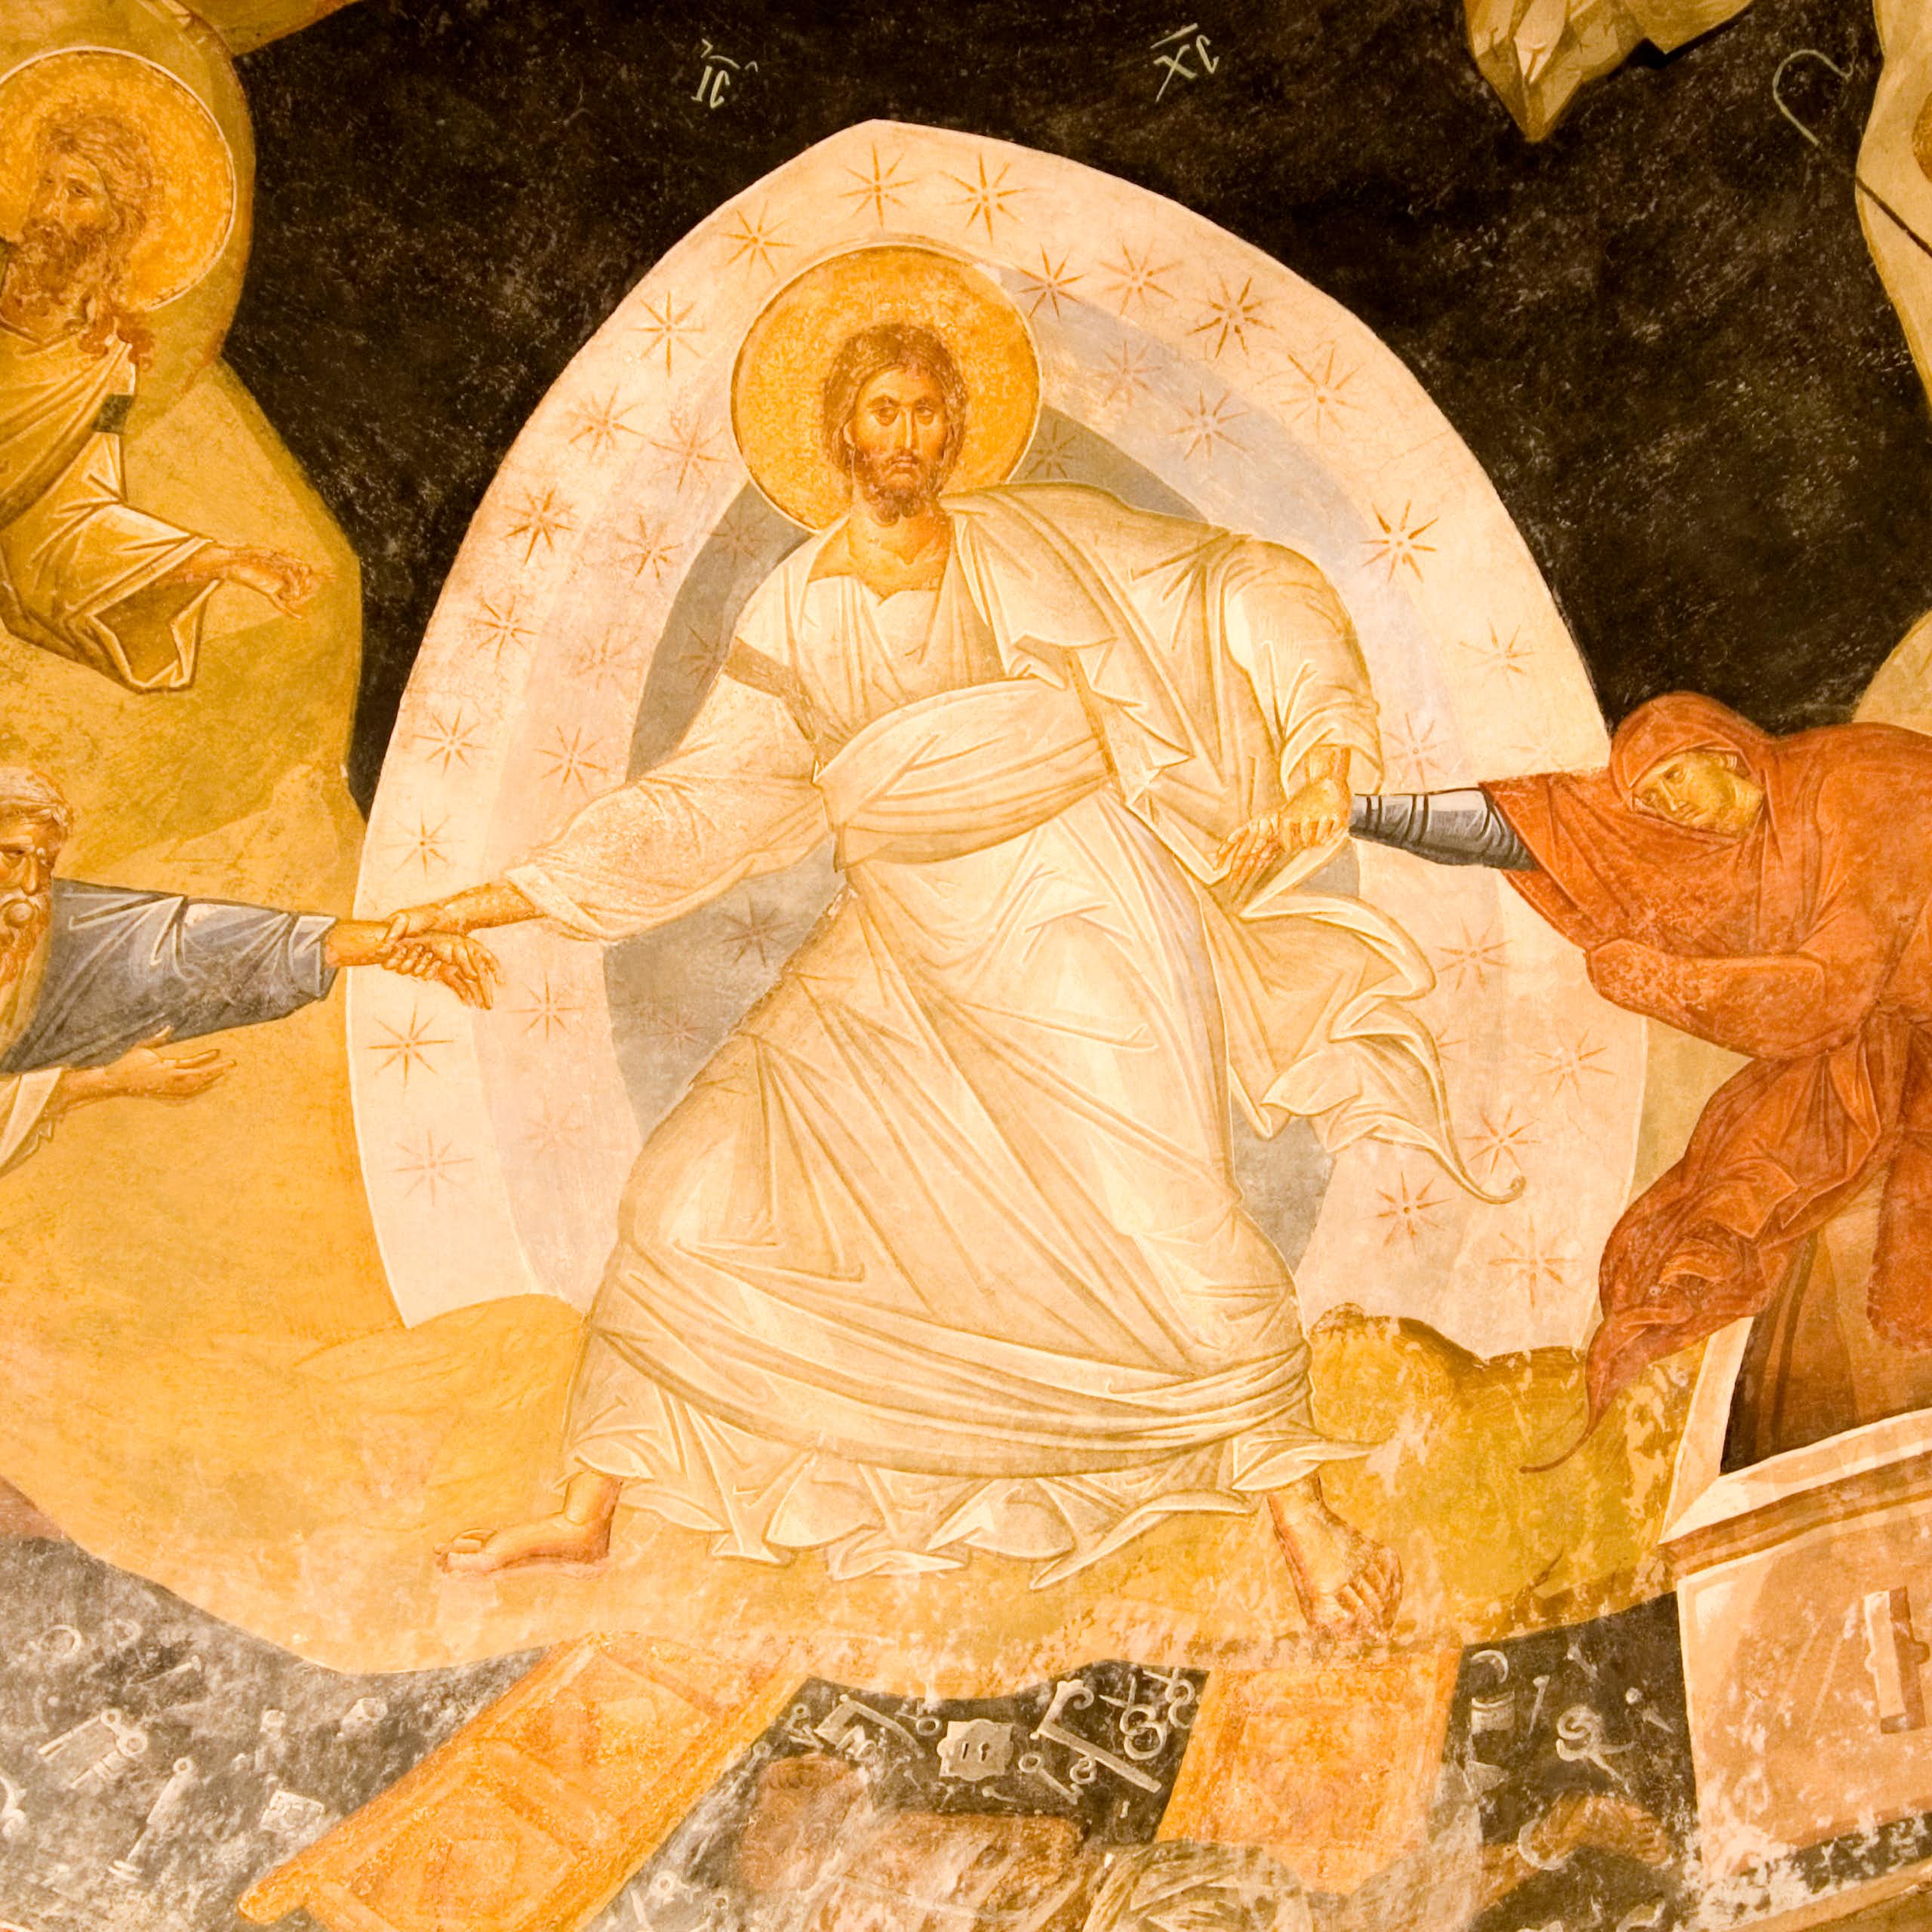 Christ with a halo and angels around him in a 14th century fresco, Chora Church, Istanbul ,Turkey.